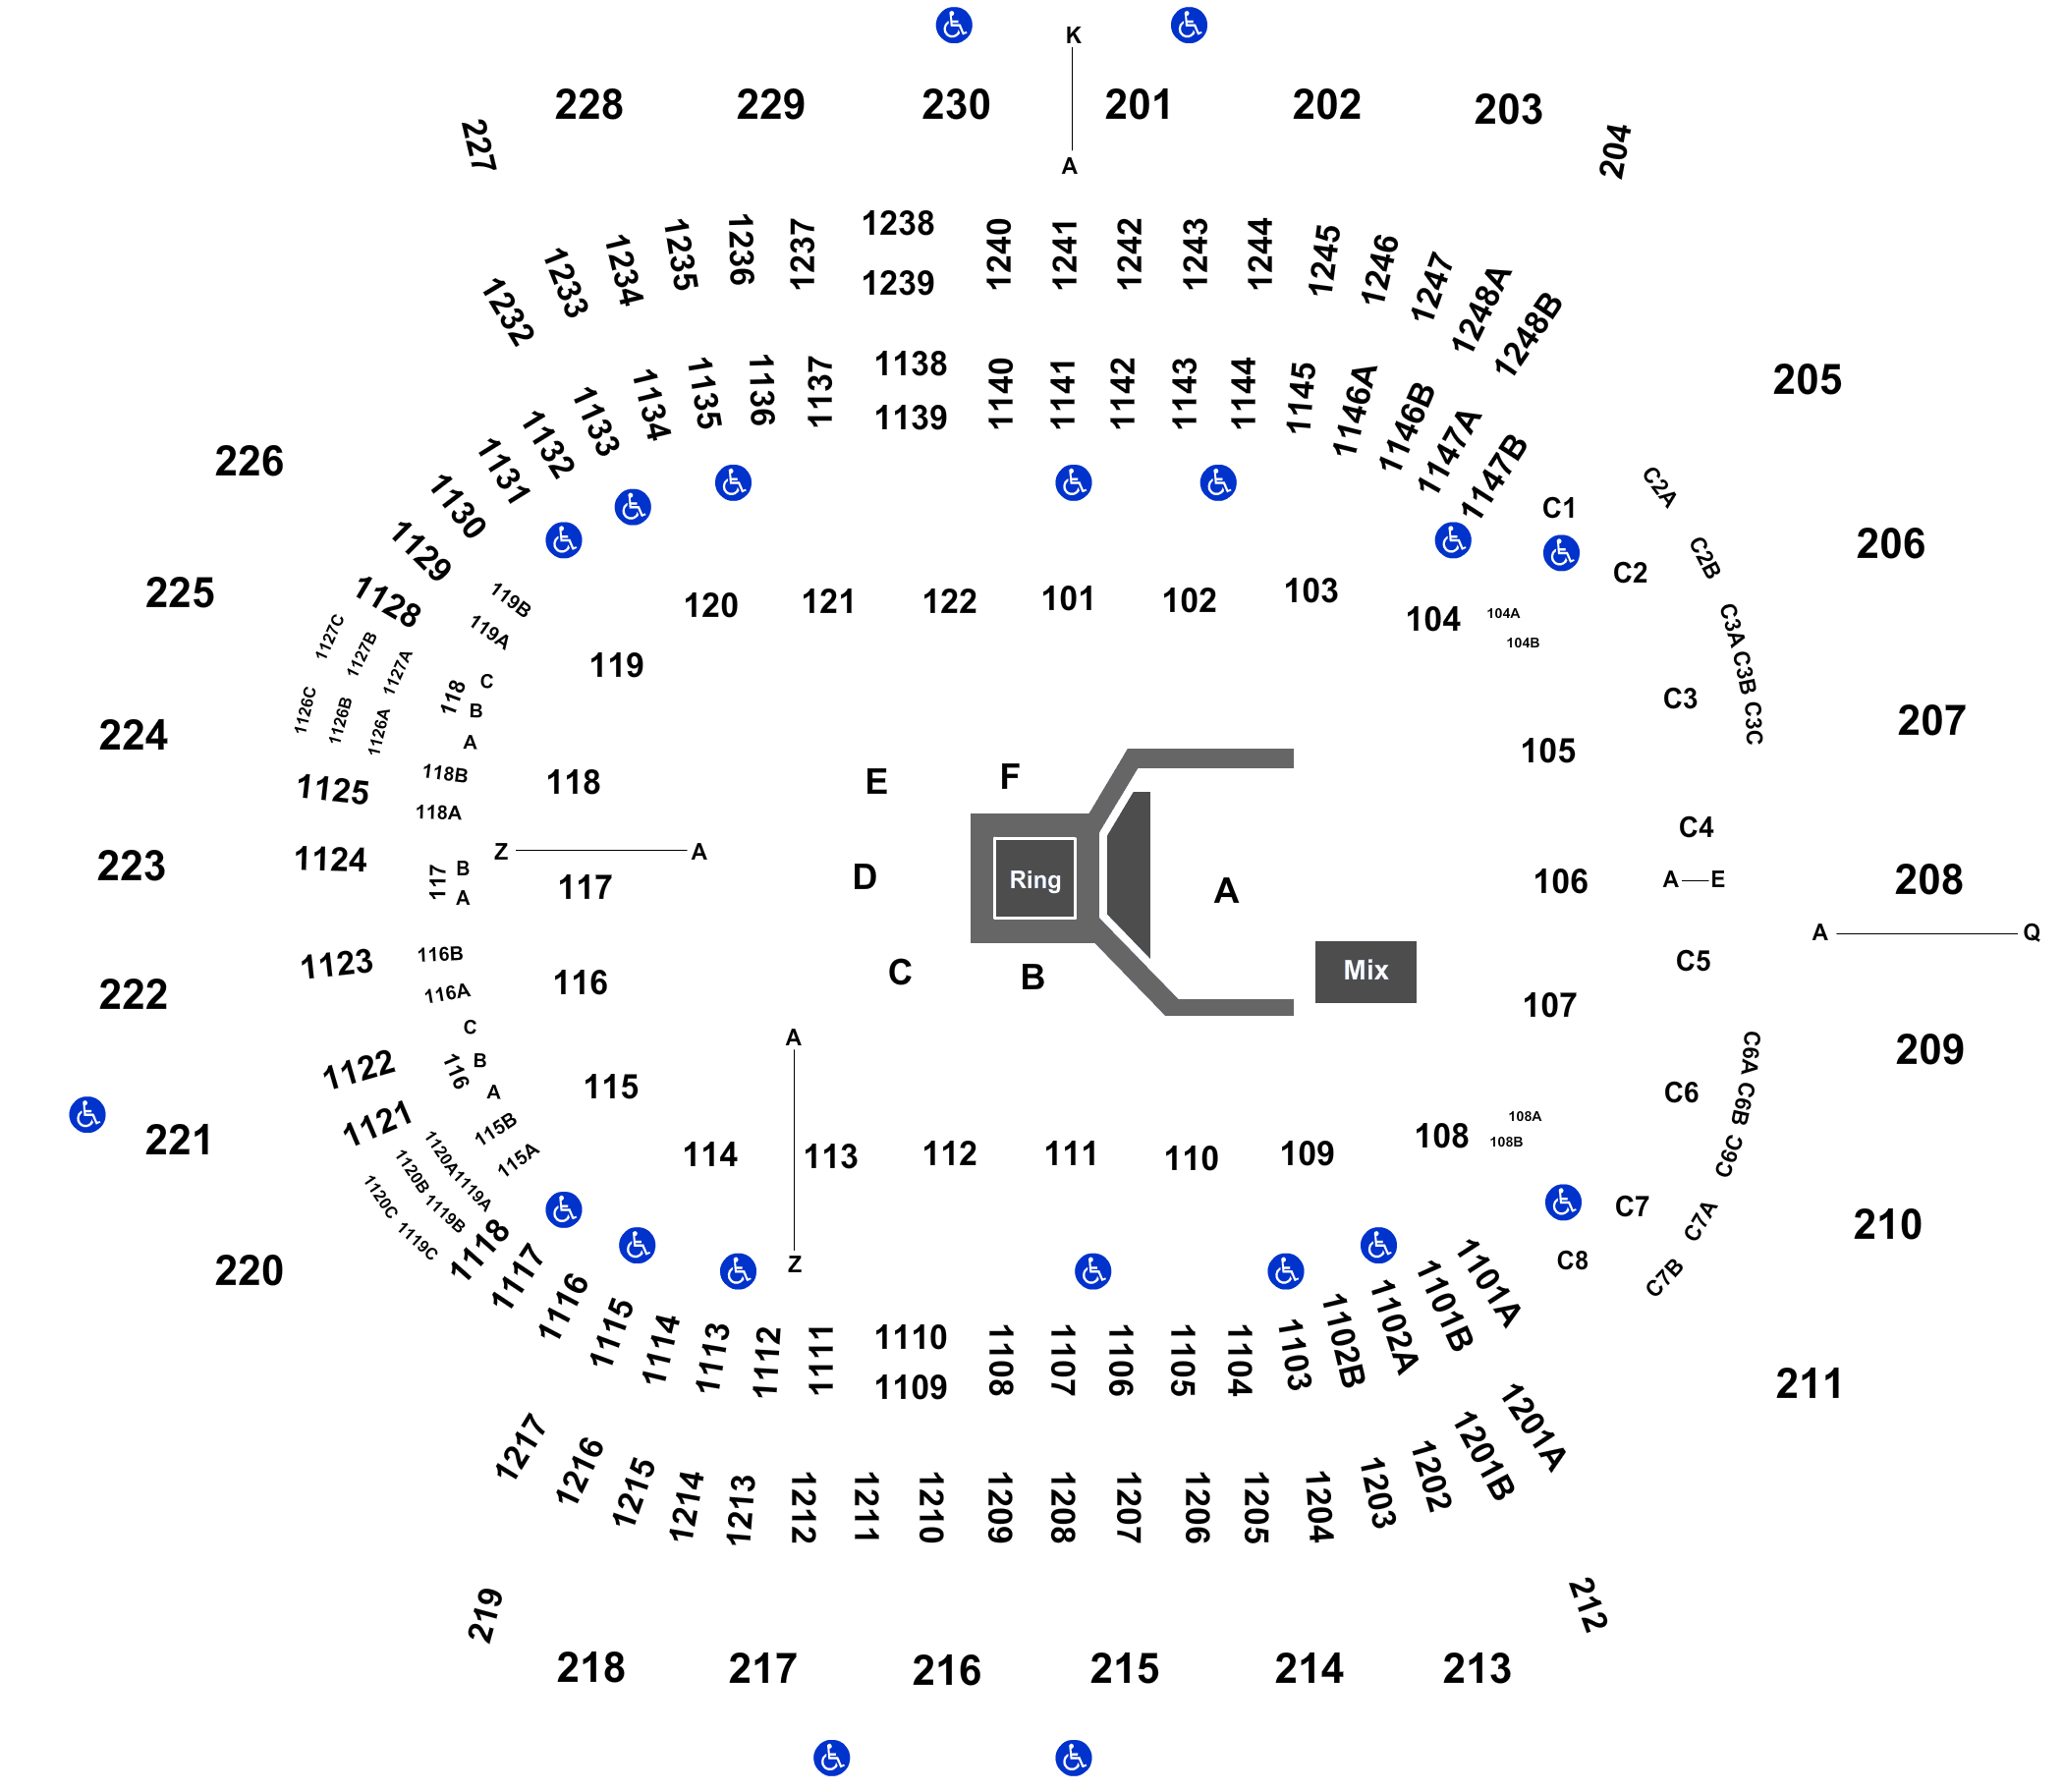 Prudential Center Concert Seating Chart 